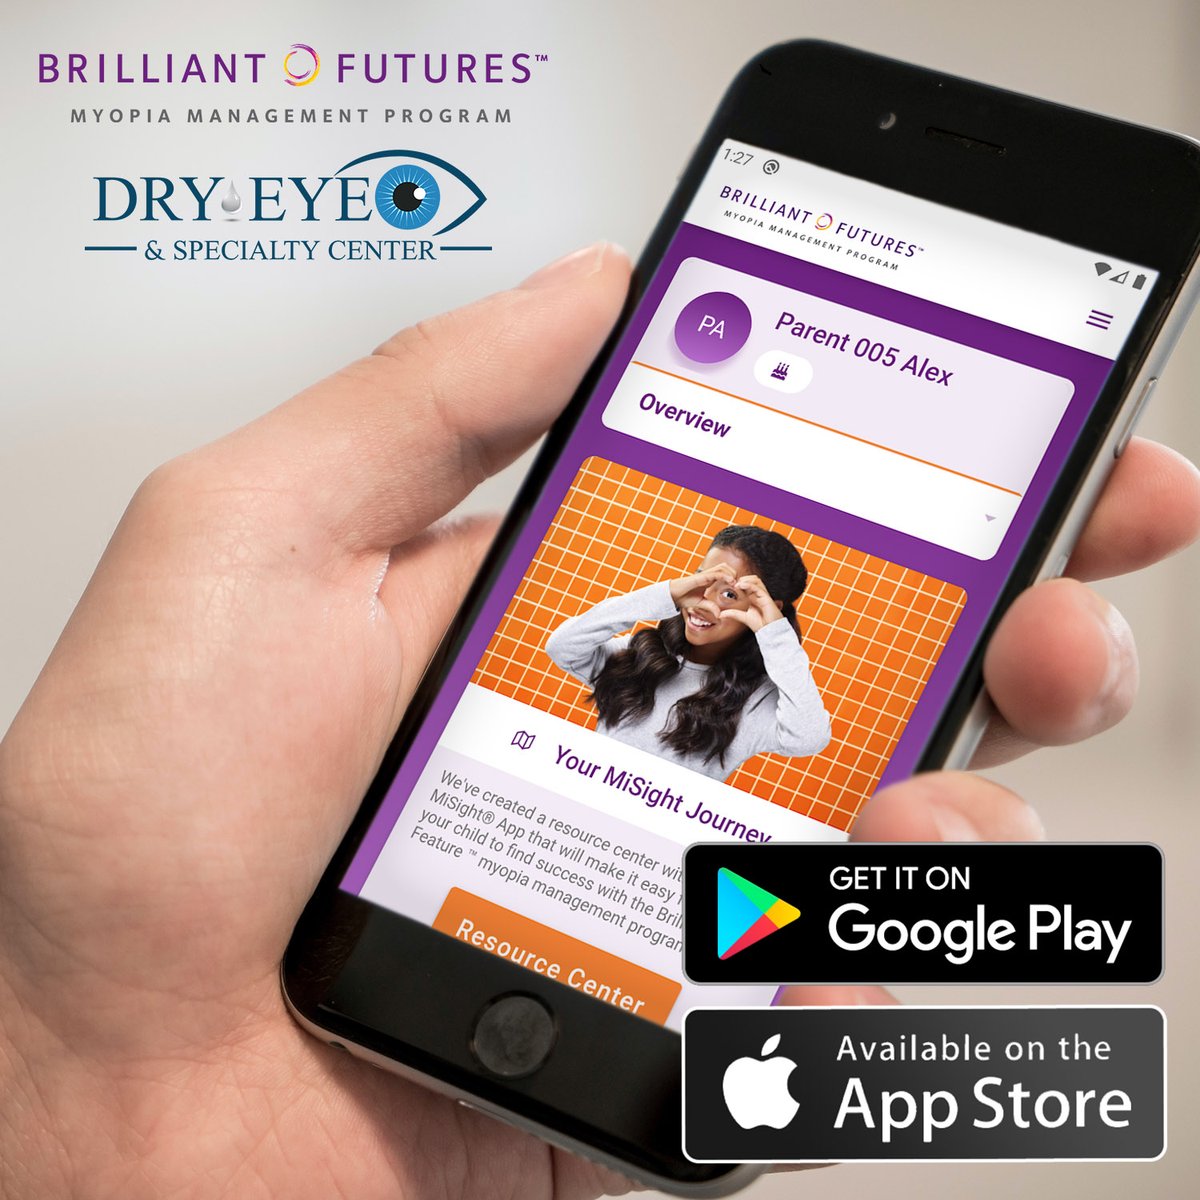 We are proud to have partnered with @CooperVision new MiSight - Brilliant Futures Myopia Management program! 

bit.ly/3v6LzxE

#dryeye #myopia #brilliantfutures #coopervision #misight #contacts #sclerallens #optometry #eyecare #eyehealth